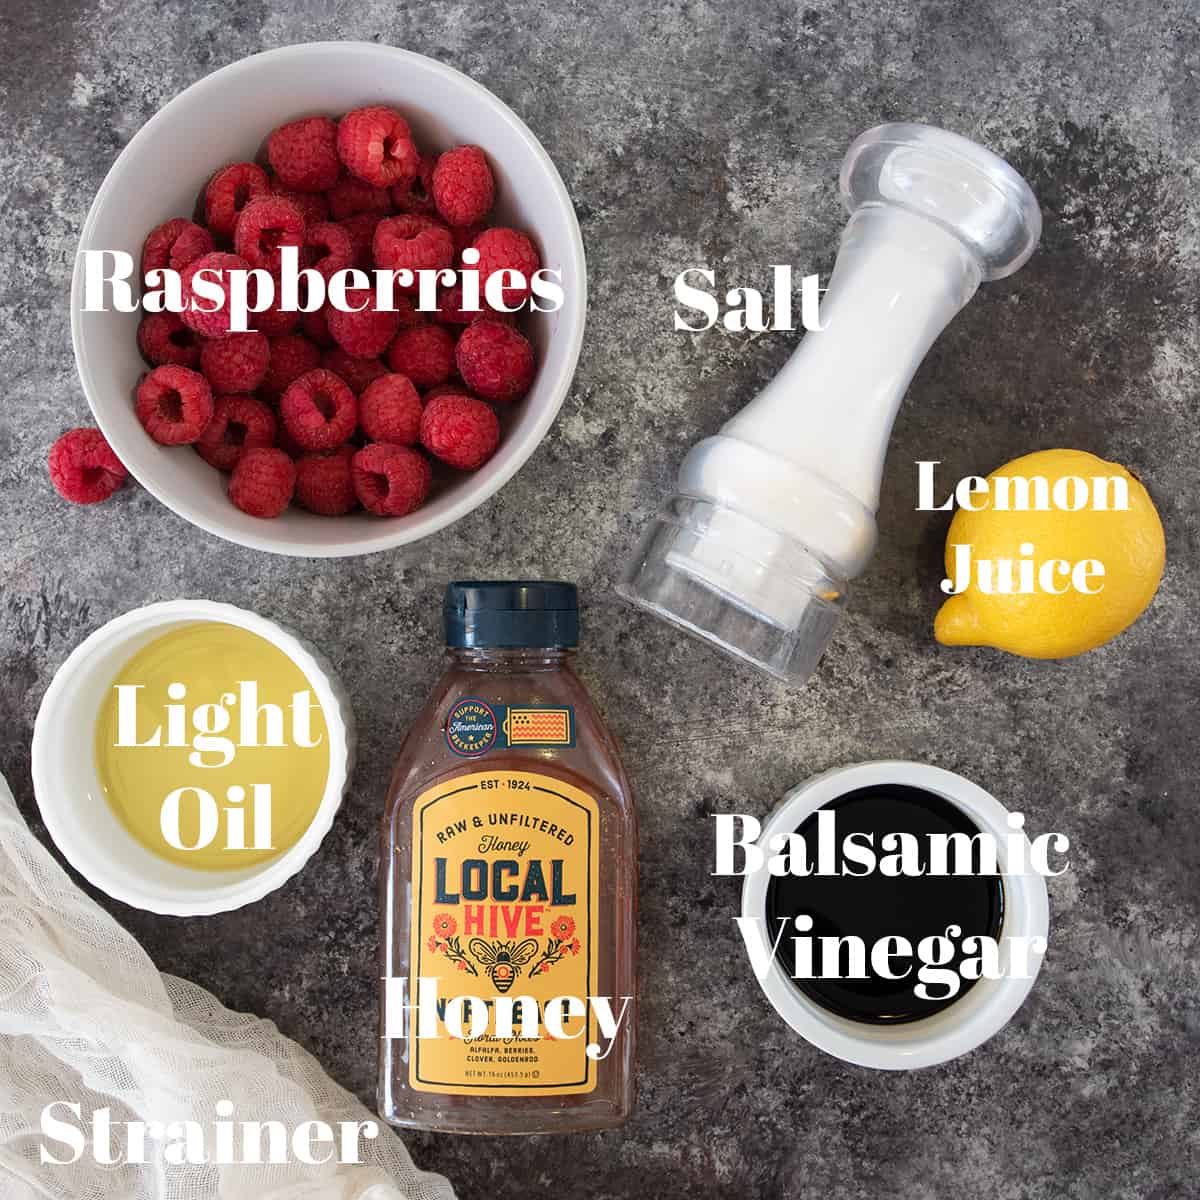 Raspberry vinaigrette dressing ingredients with text labels